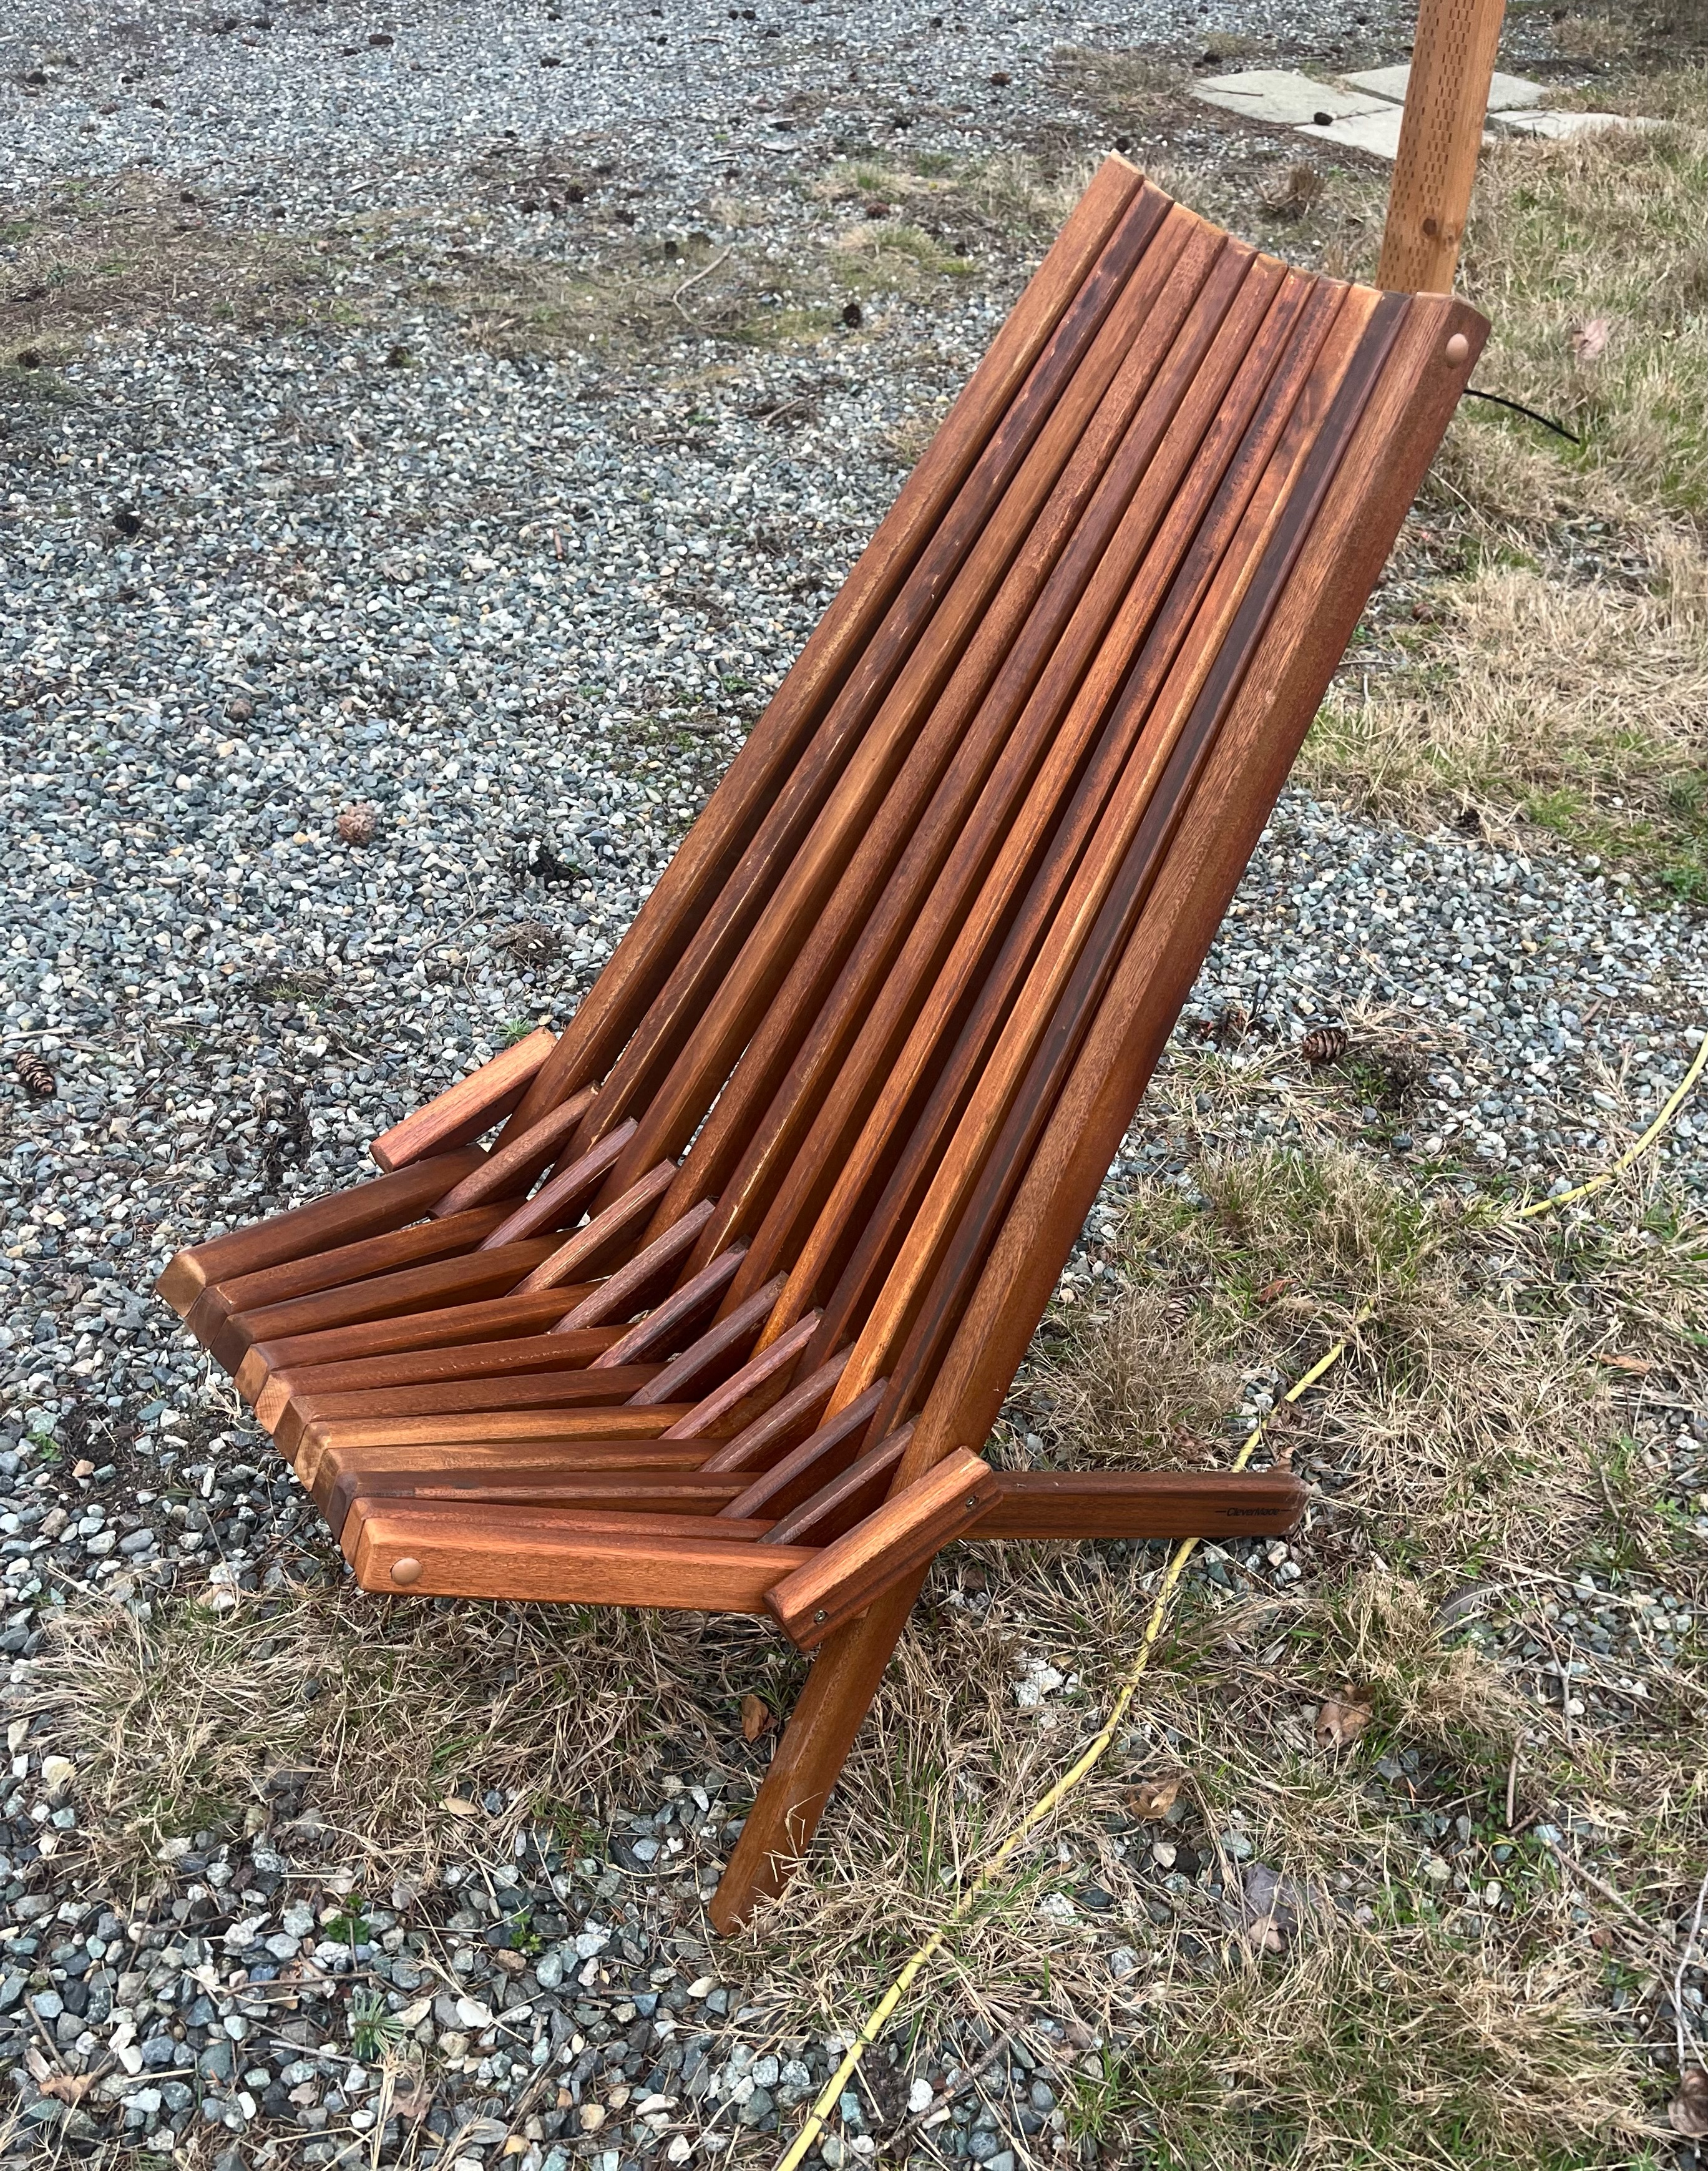 Tamarack Chairs Bring Comfort to the Outdoors